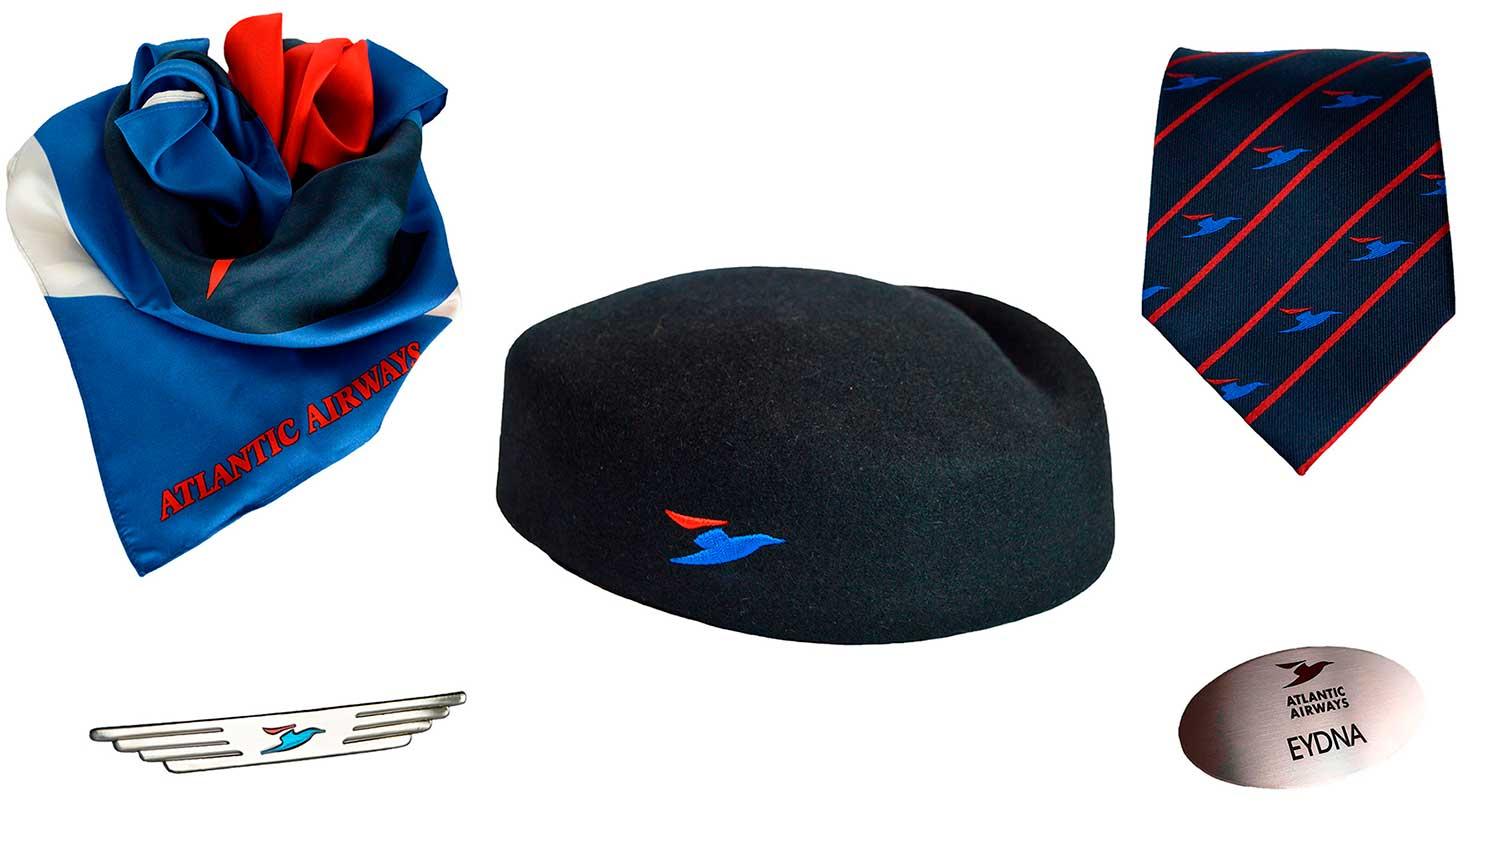 Airline uniform accessories with incorporated logo for Atlantic Airways